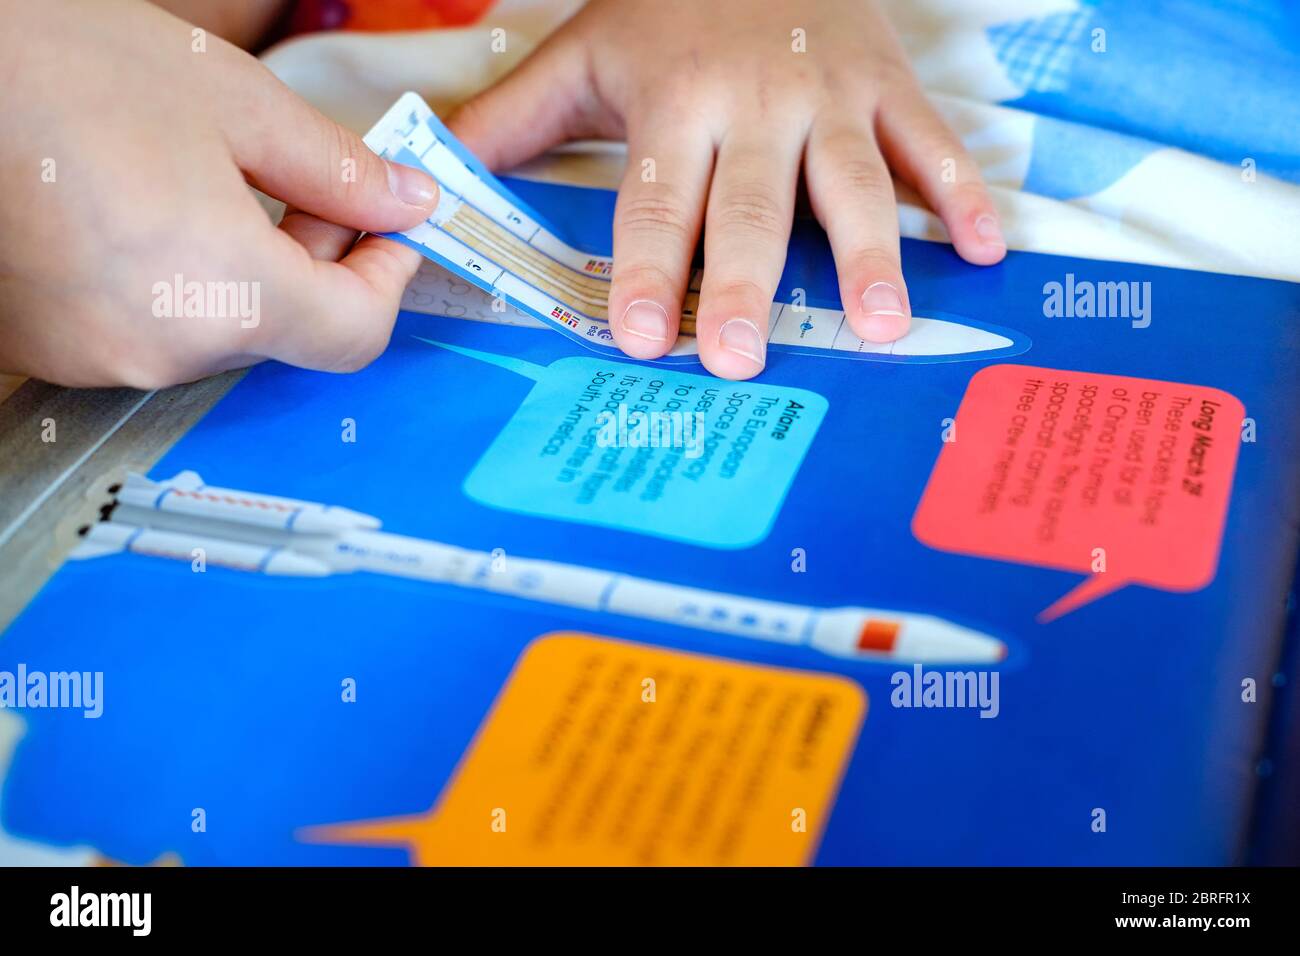 Bangkok, Thailand - May 20, 2020: Child’s hand, Kid’s hand is sticking rocket sticker on space education activity book. Space education activity for s Stock Photo